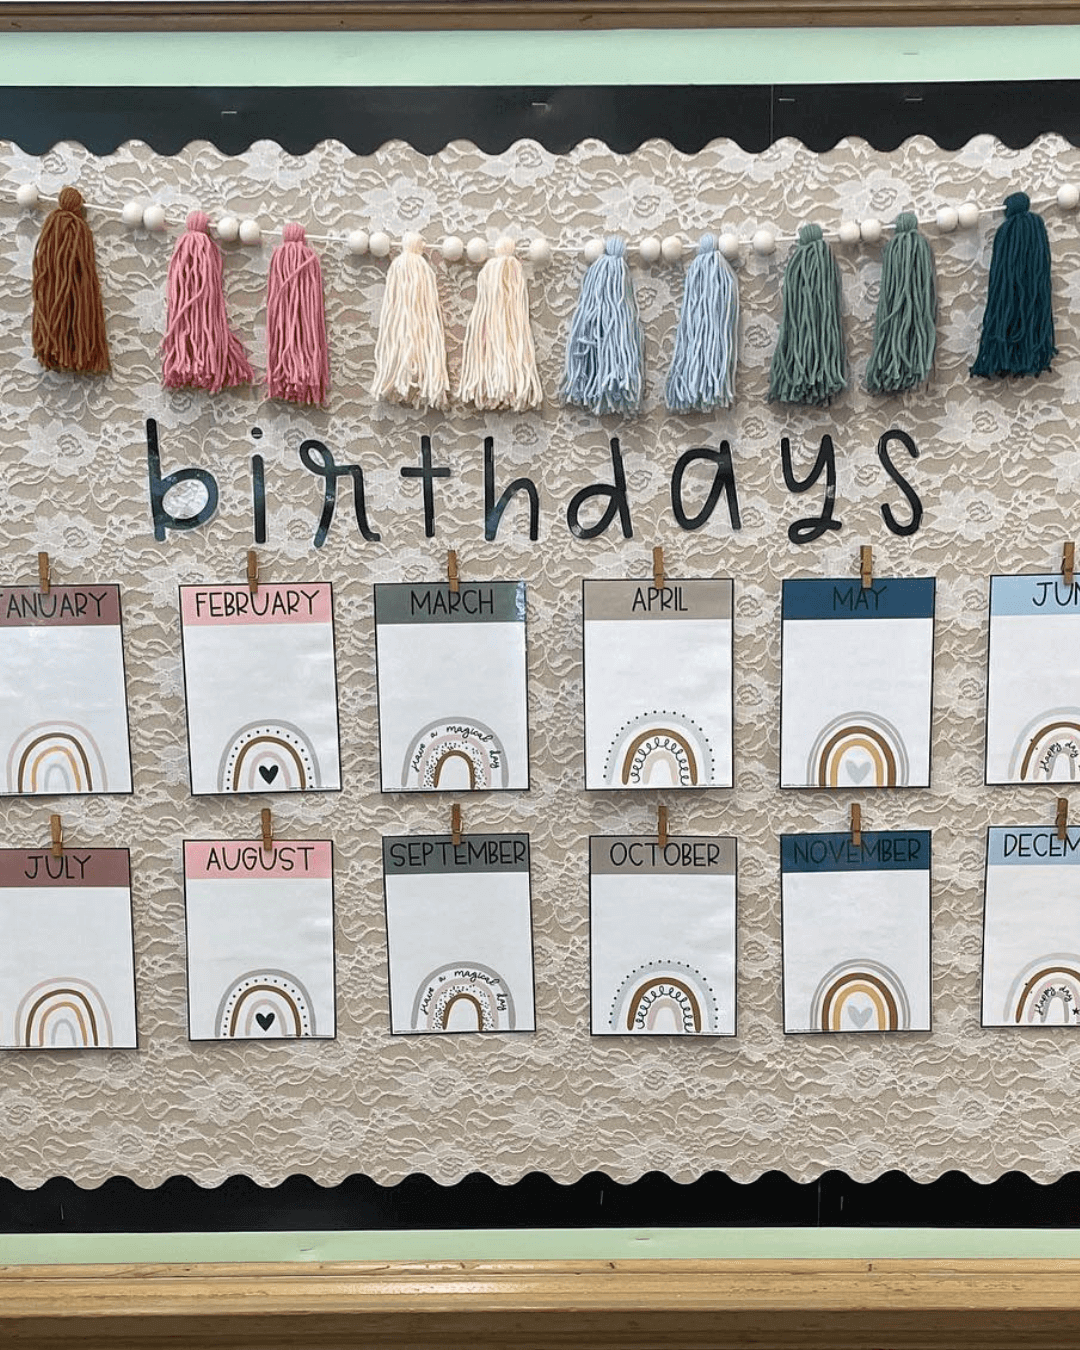 The left image shows a birthday display on a lace background with woolen tassels handing above. The right image shows lots of small bags of Startburst lollies stapled to notes that read ‘I’m bursting’. The labels are from the Spotty Brights range.” style=